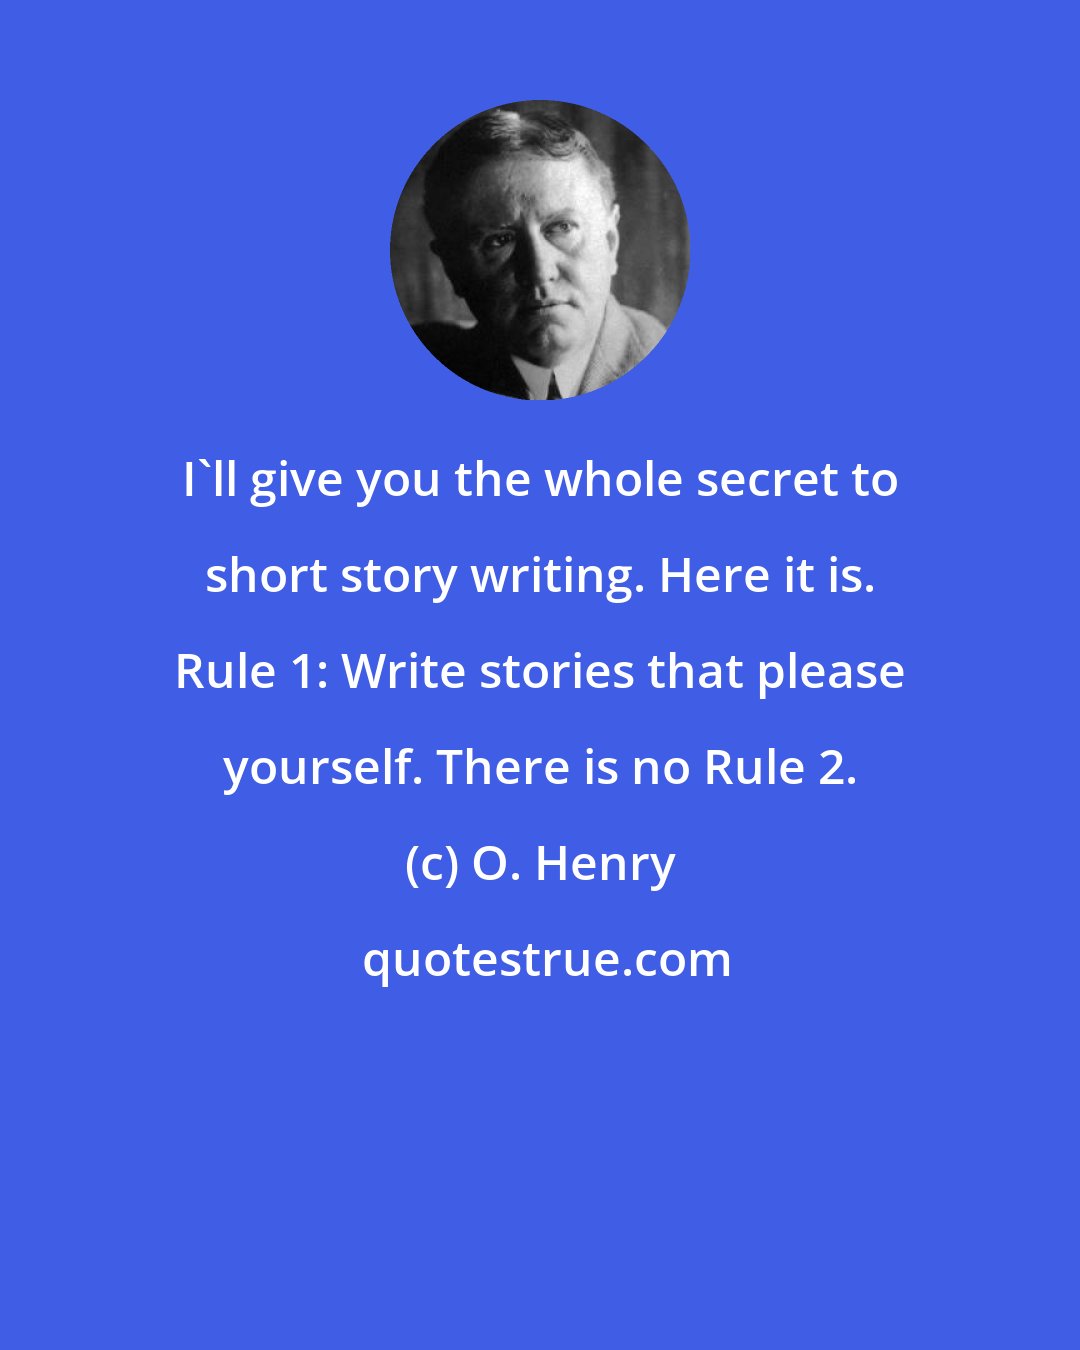 O. Henry: I'll give you the whole secret to short story writing. Here it is. Rule 1: Write stories that please yourself. There is no Rule 2.